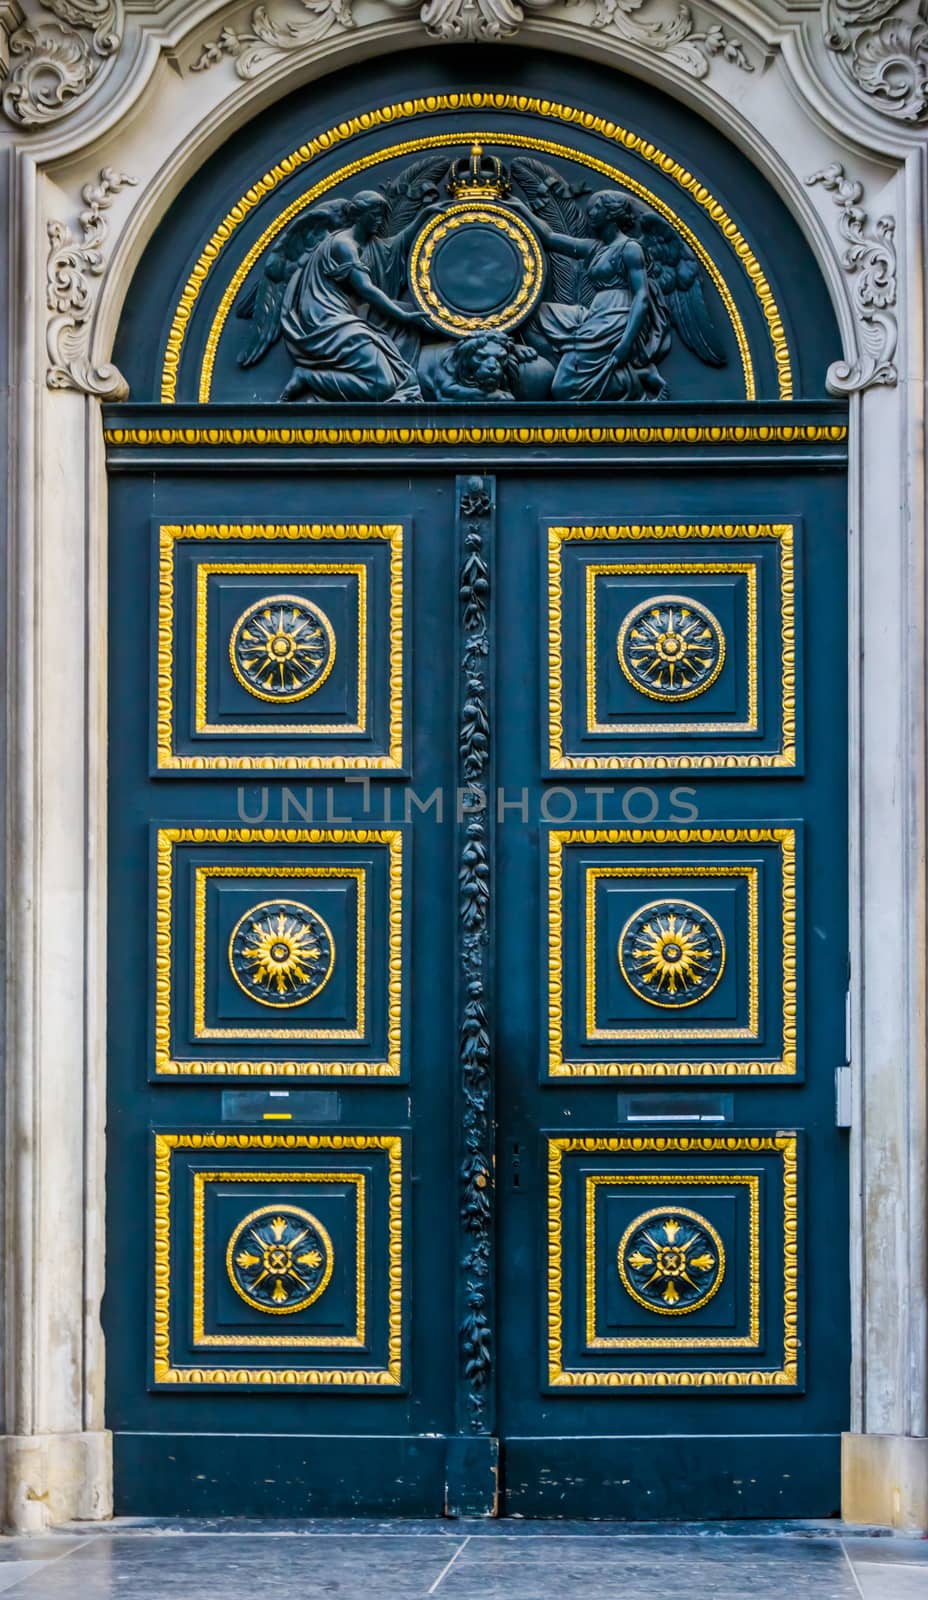 Old classic doorway decorated with gold and patterns, angel statues above the door, historical architecture